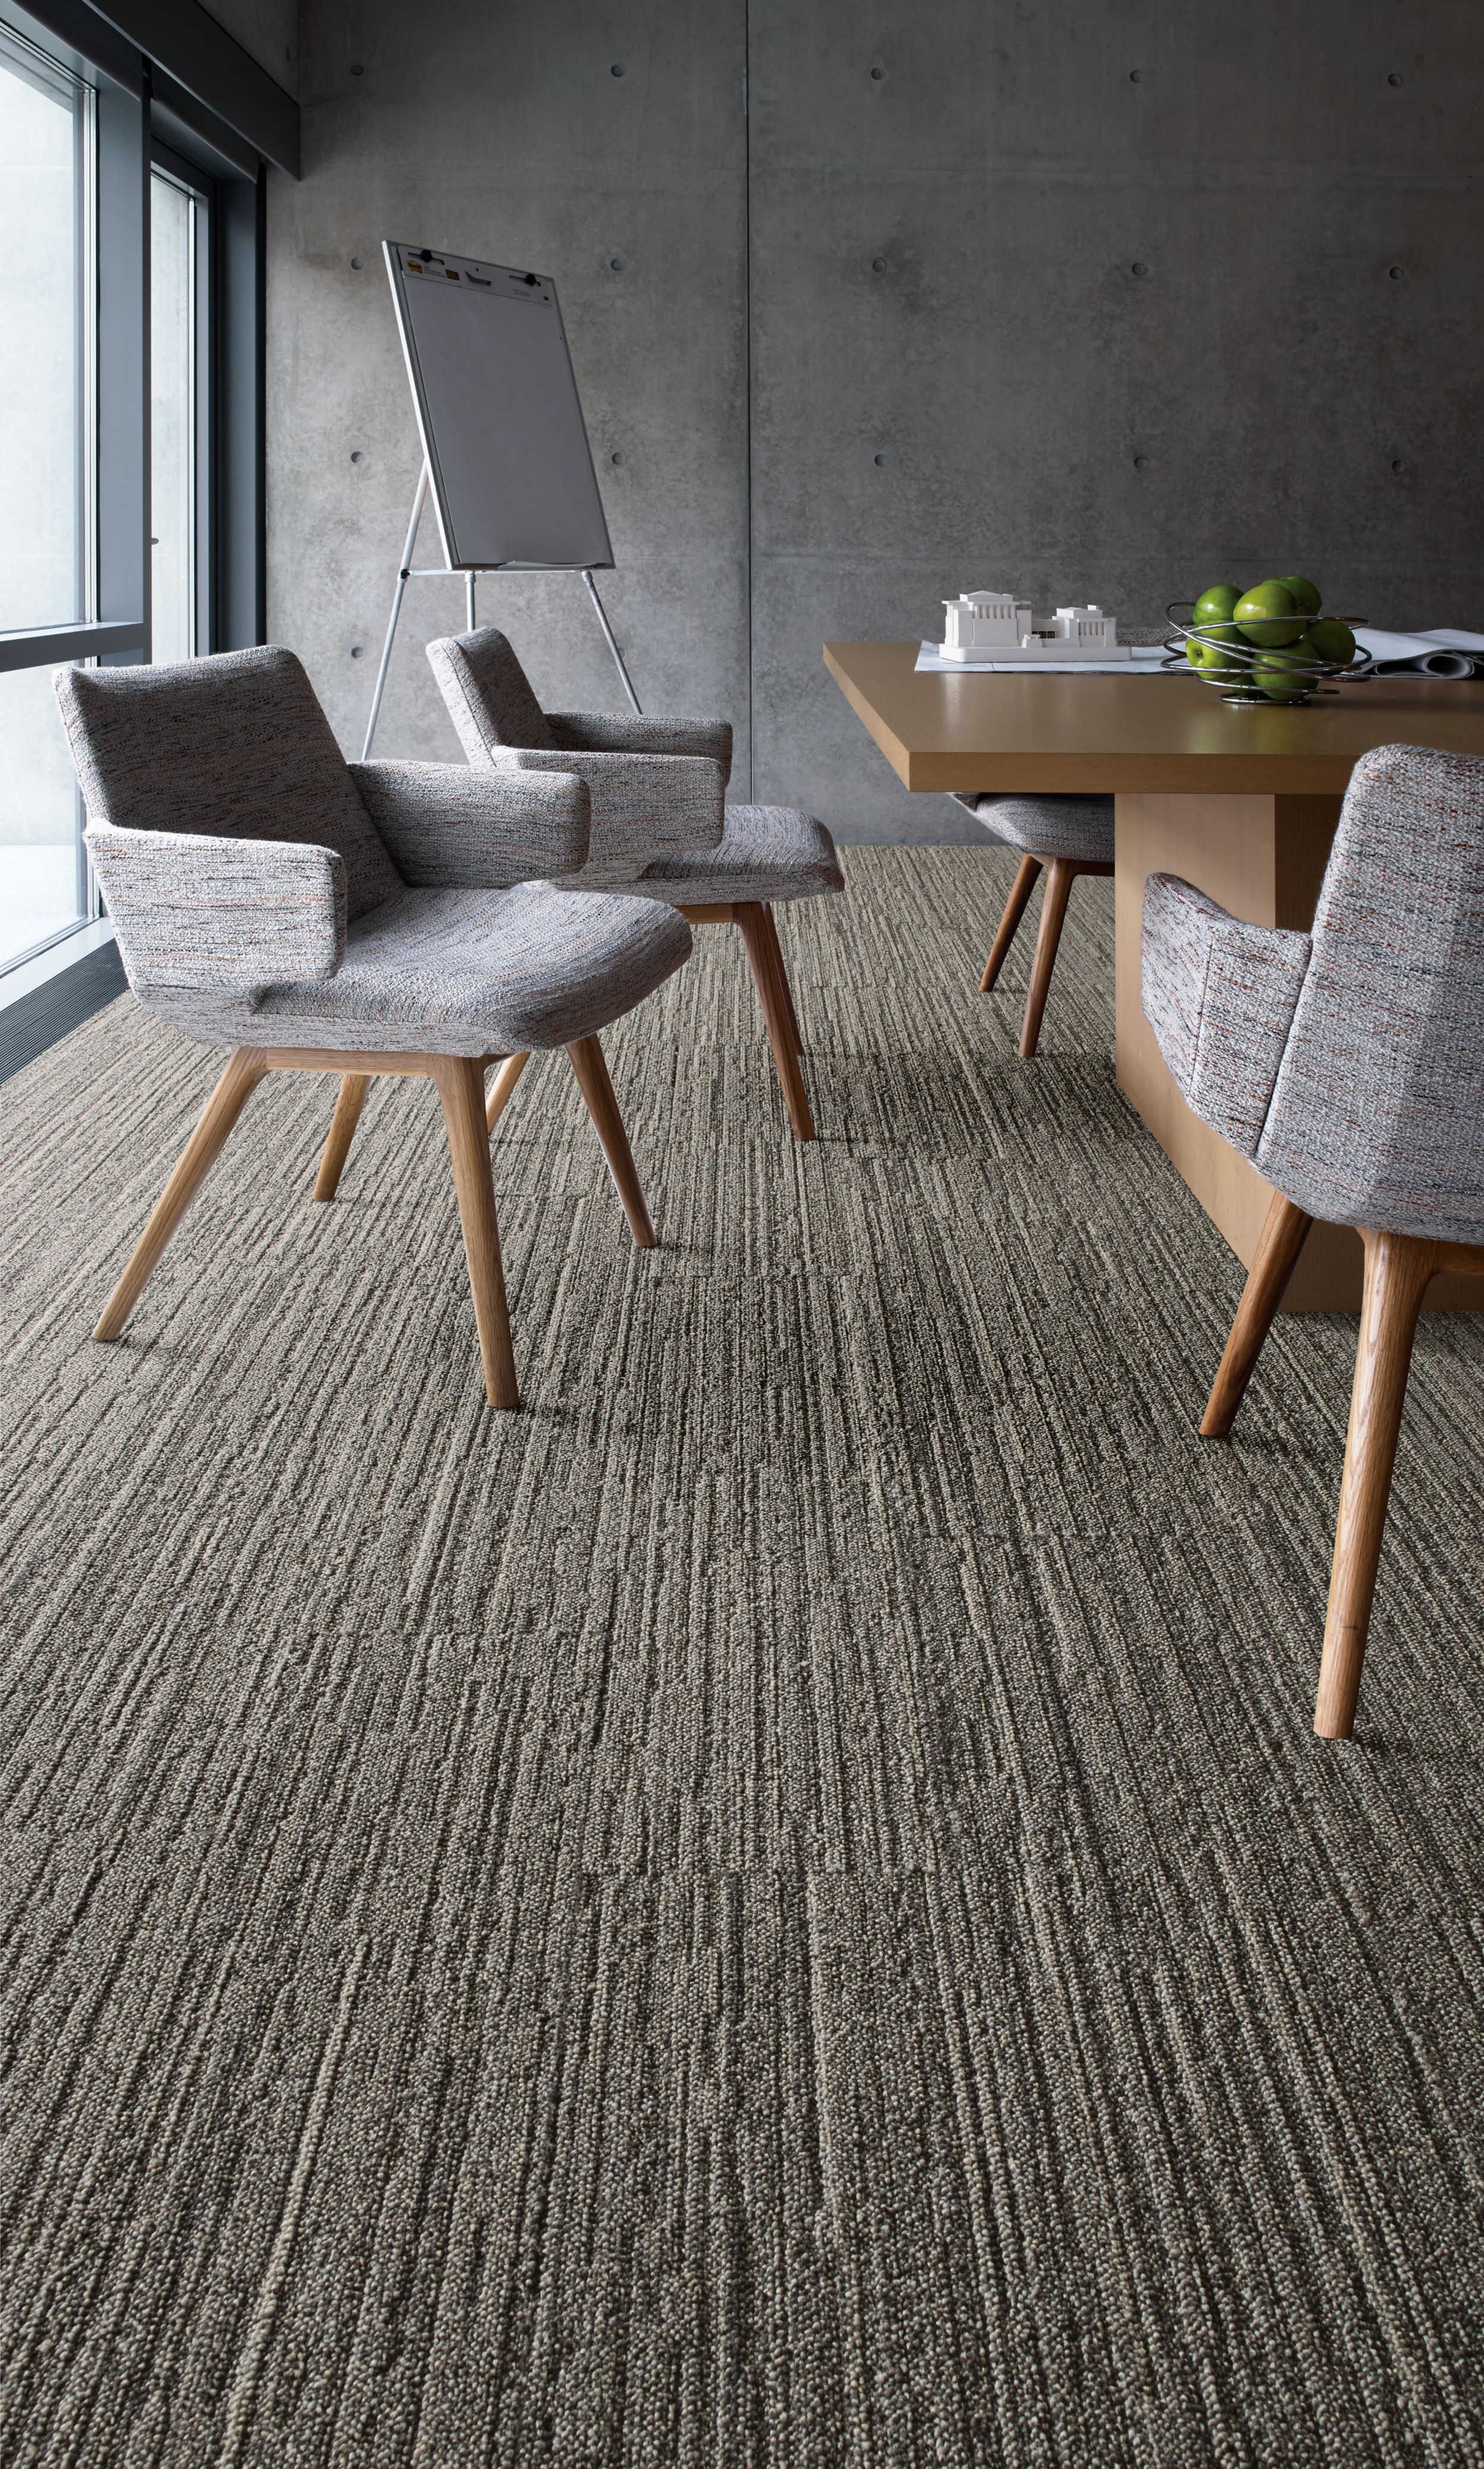 Interface WW880 plank carpet tile in meeting room with table and chairs imagen número 1